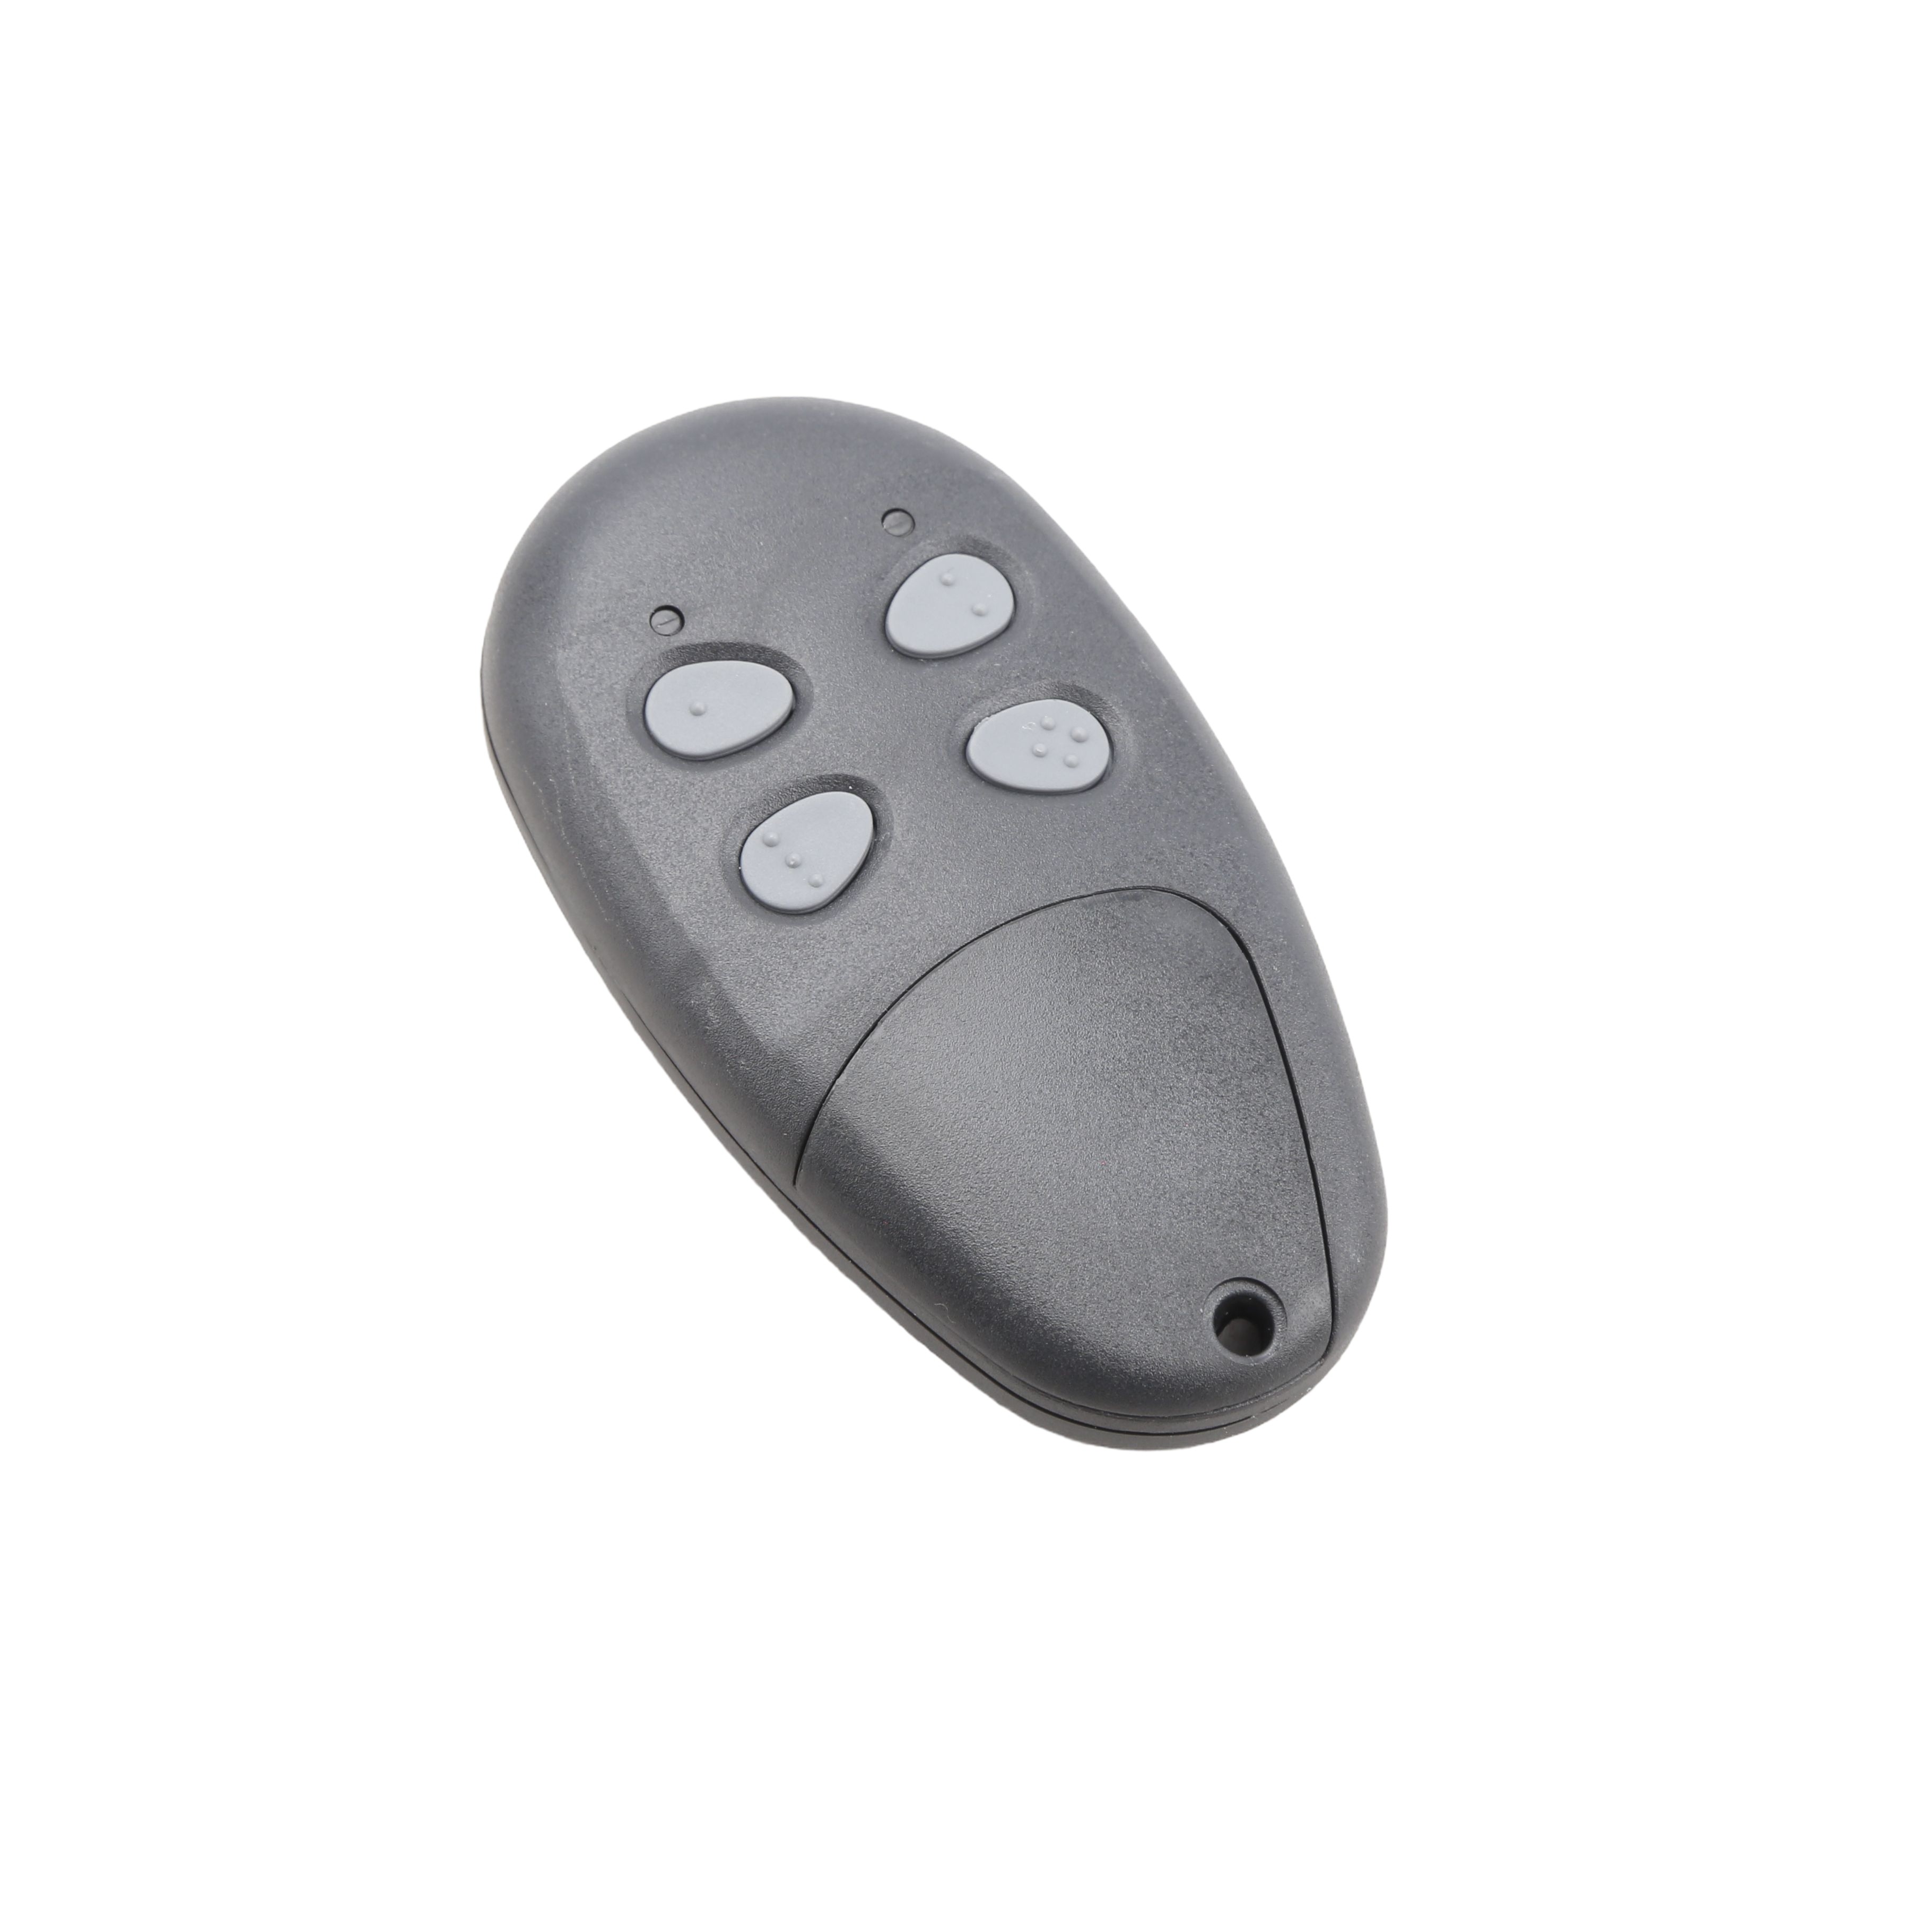 https://usautomaticgateopeners.com/store/media/catalog/product/cache/1/image/9df78eab33525d08d6e5fb8d27136e95/0/3/030212_lcr-4-button-transmitter---usautomatic-030212_1_1.jpg